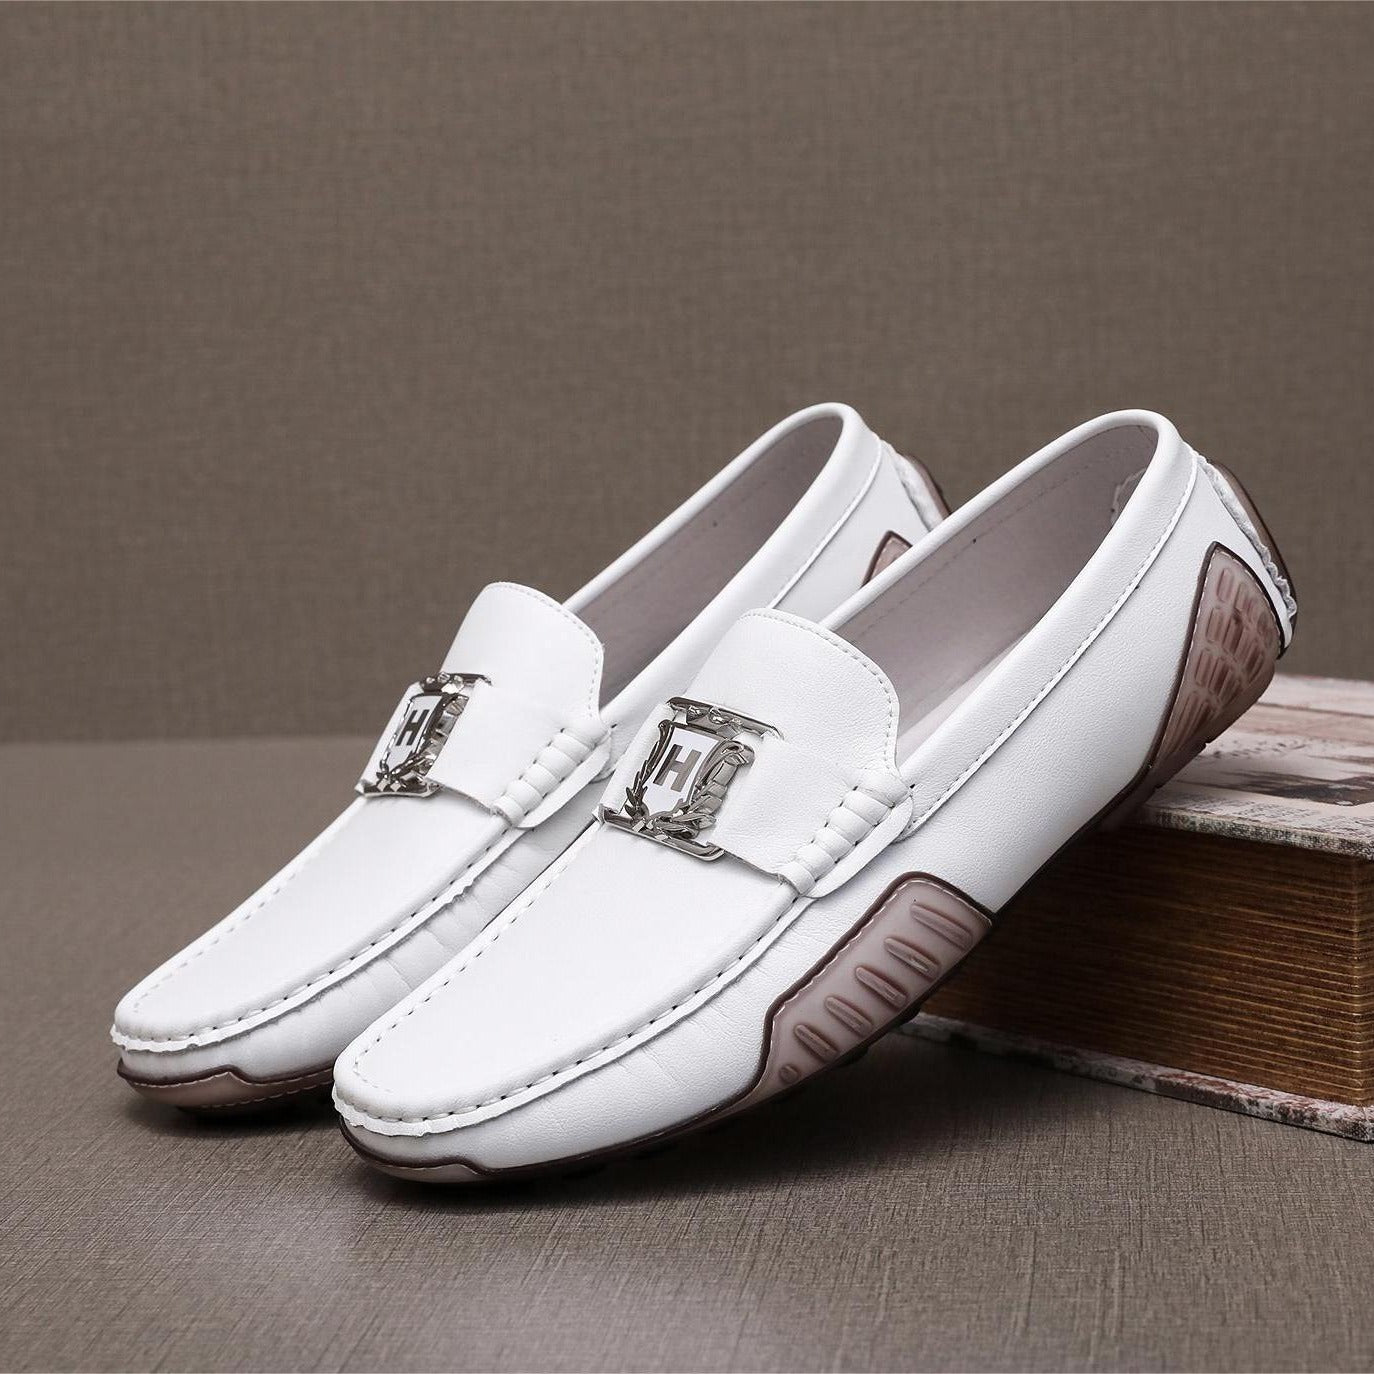 Live Hot Selling High-End Gommino Men's Leather Shoes British Autumn New plus Size Driving Casual Shoes